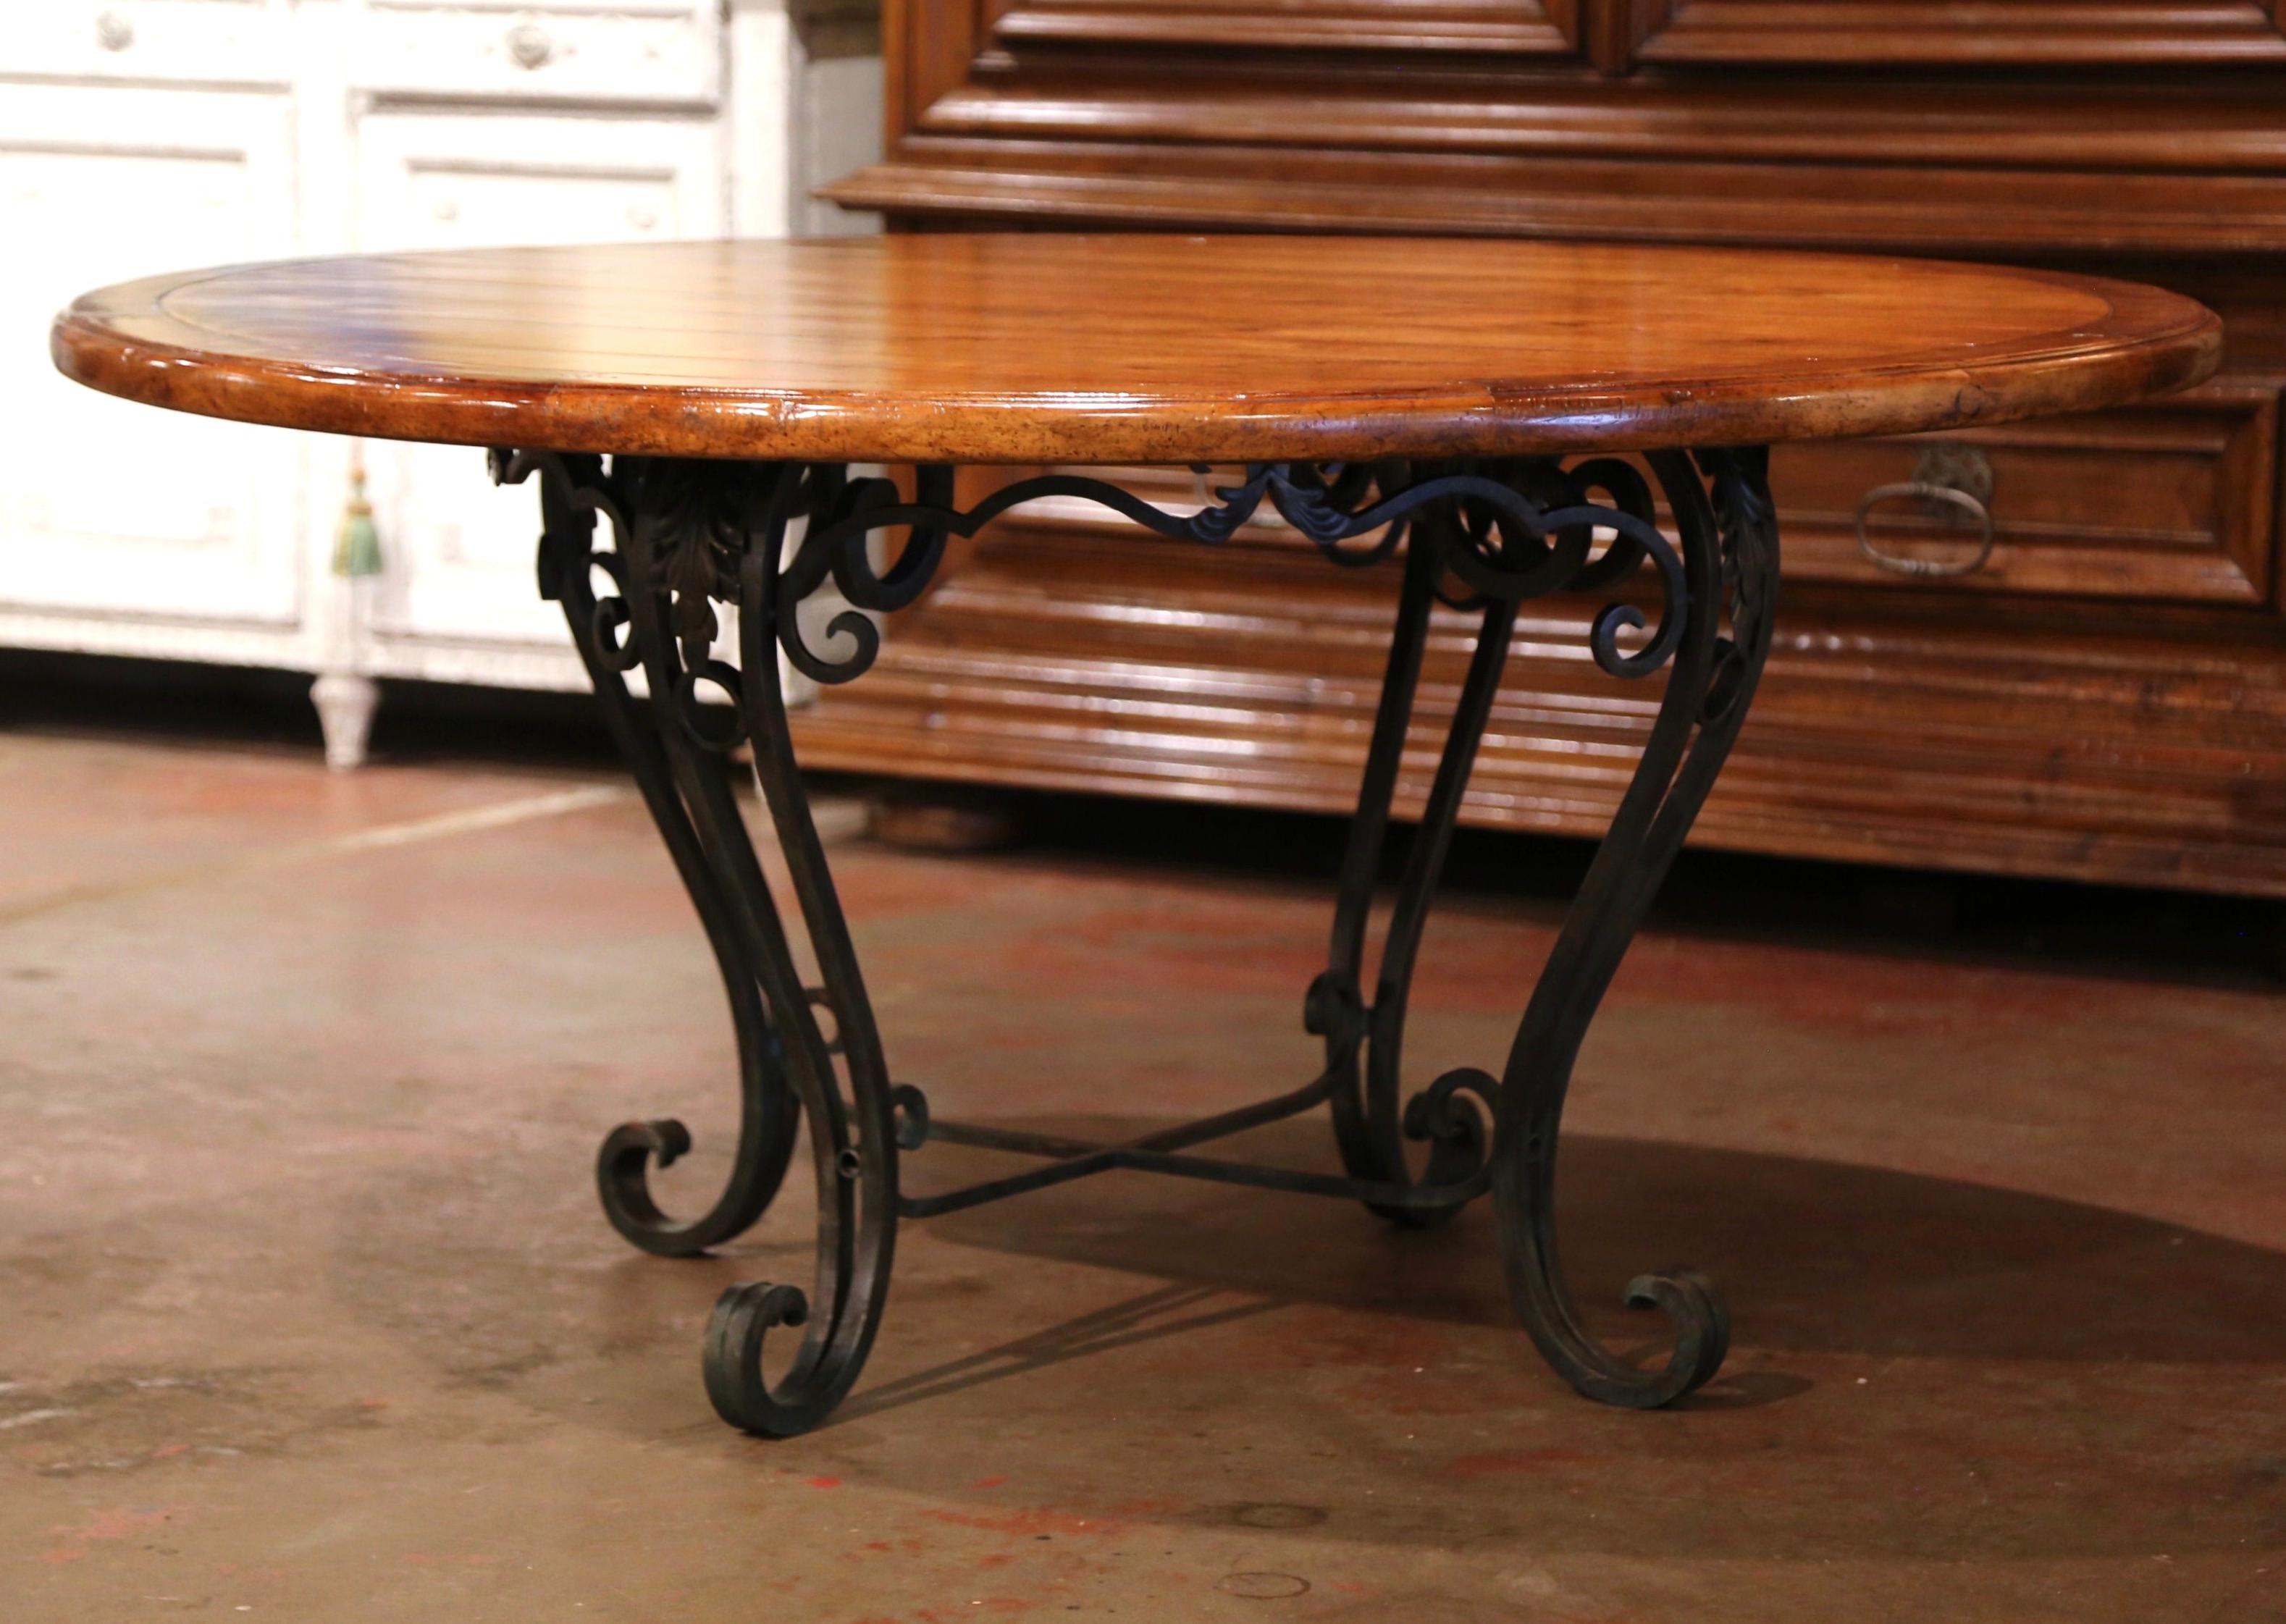 American Vintage Walnut Round Dining Room Table on Four-Leg Wrought Iron Base